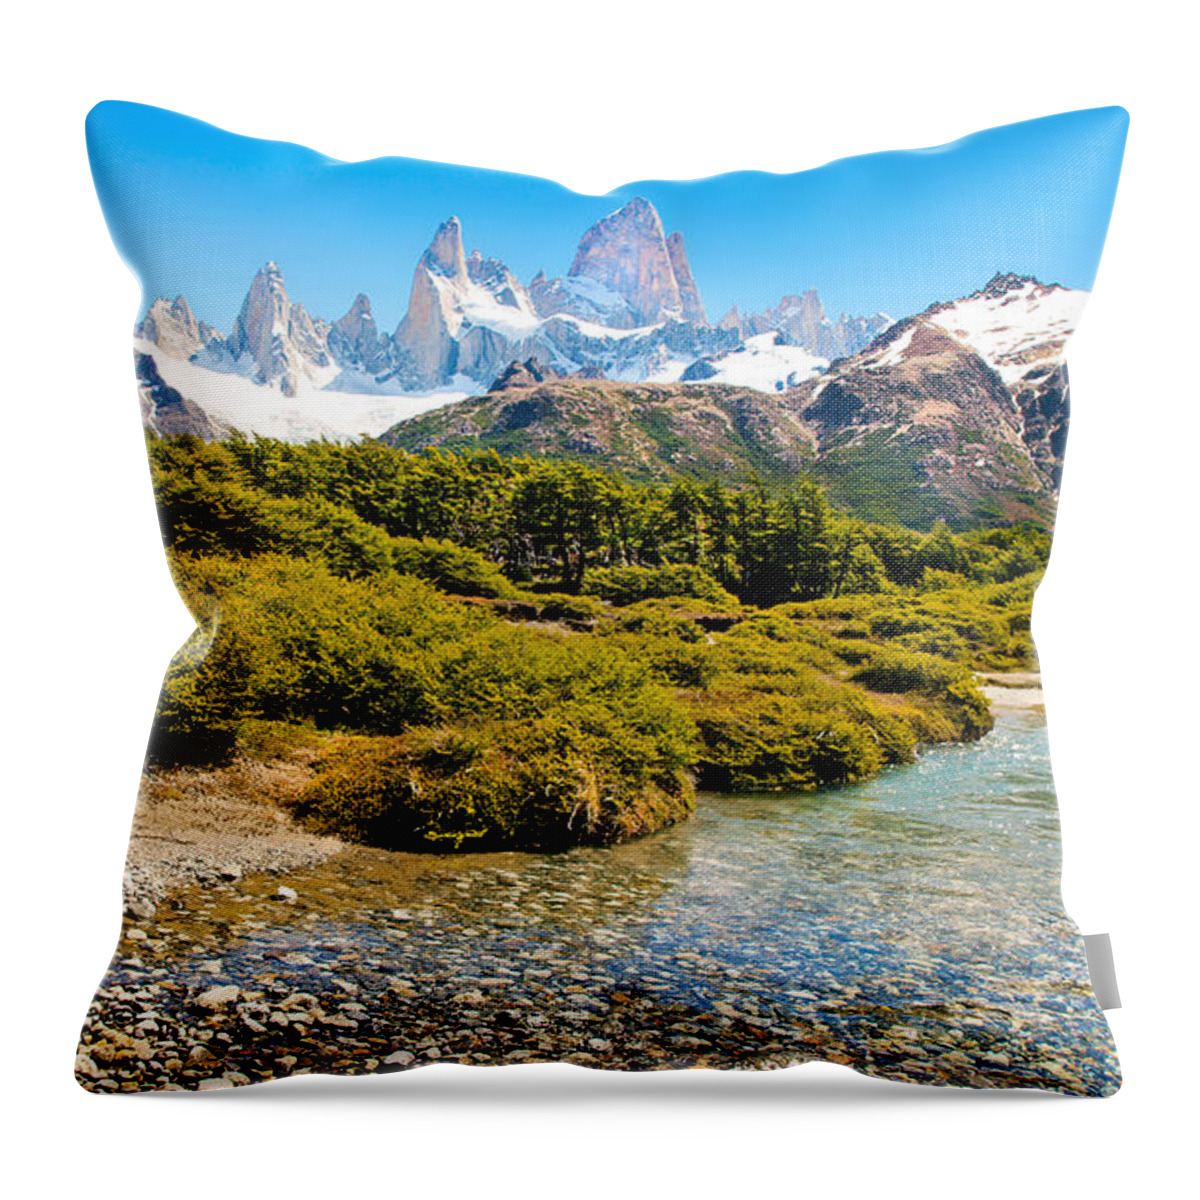 Outdoor Throw Pillow featuring the photograph Scenic Patagonia #1 by JR Photography